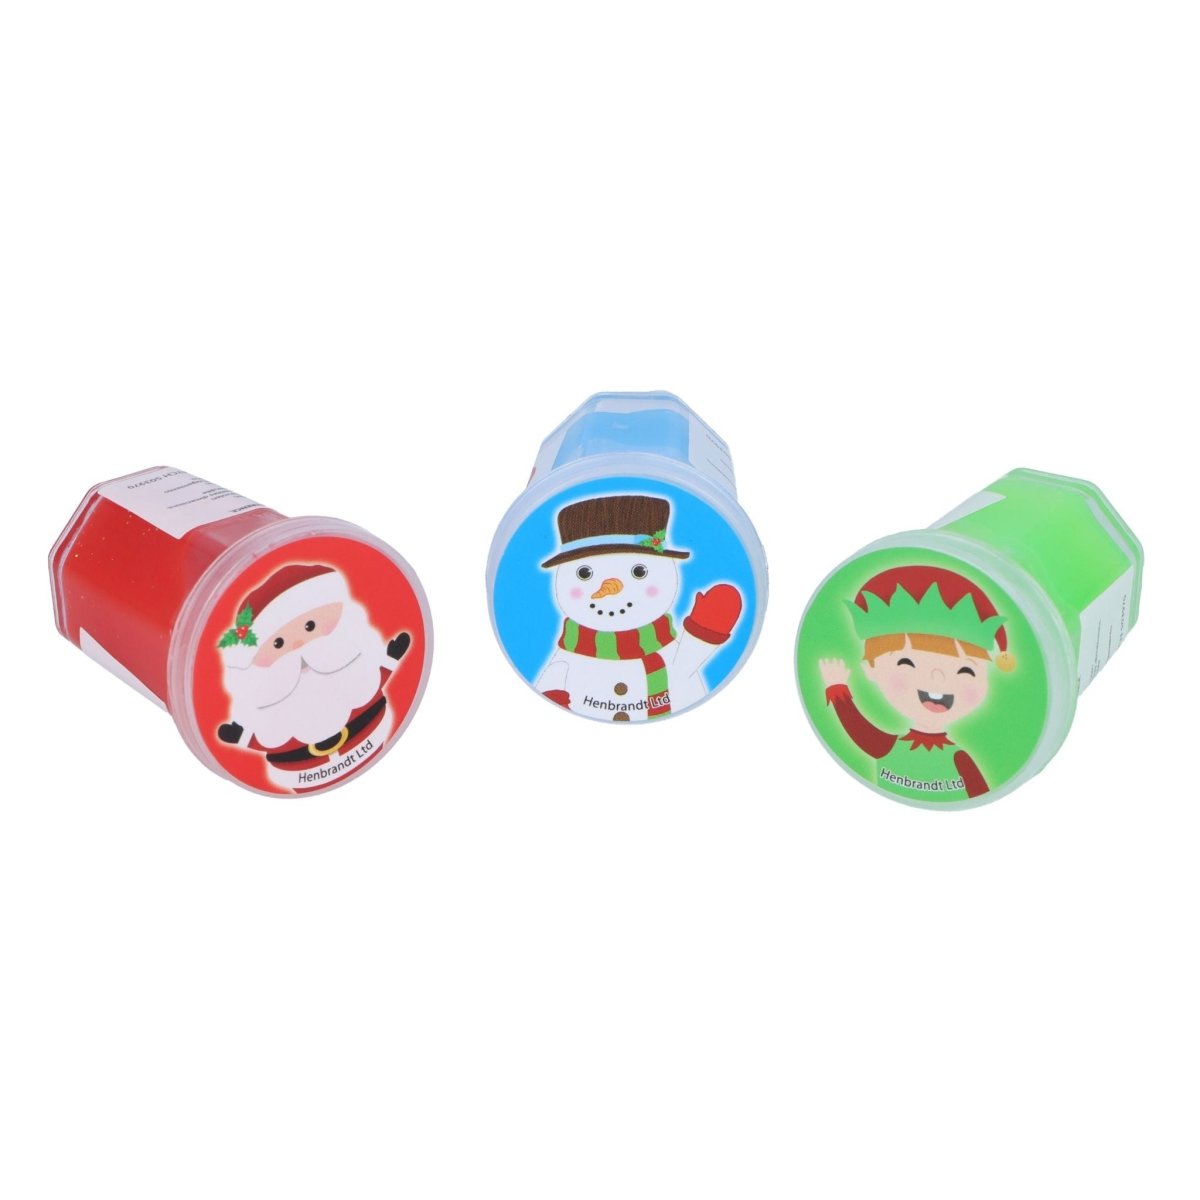 Christmas Mini Slime Tubs 6 Pack - Kids Party Craft